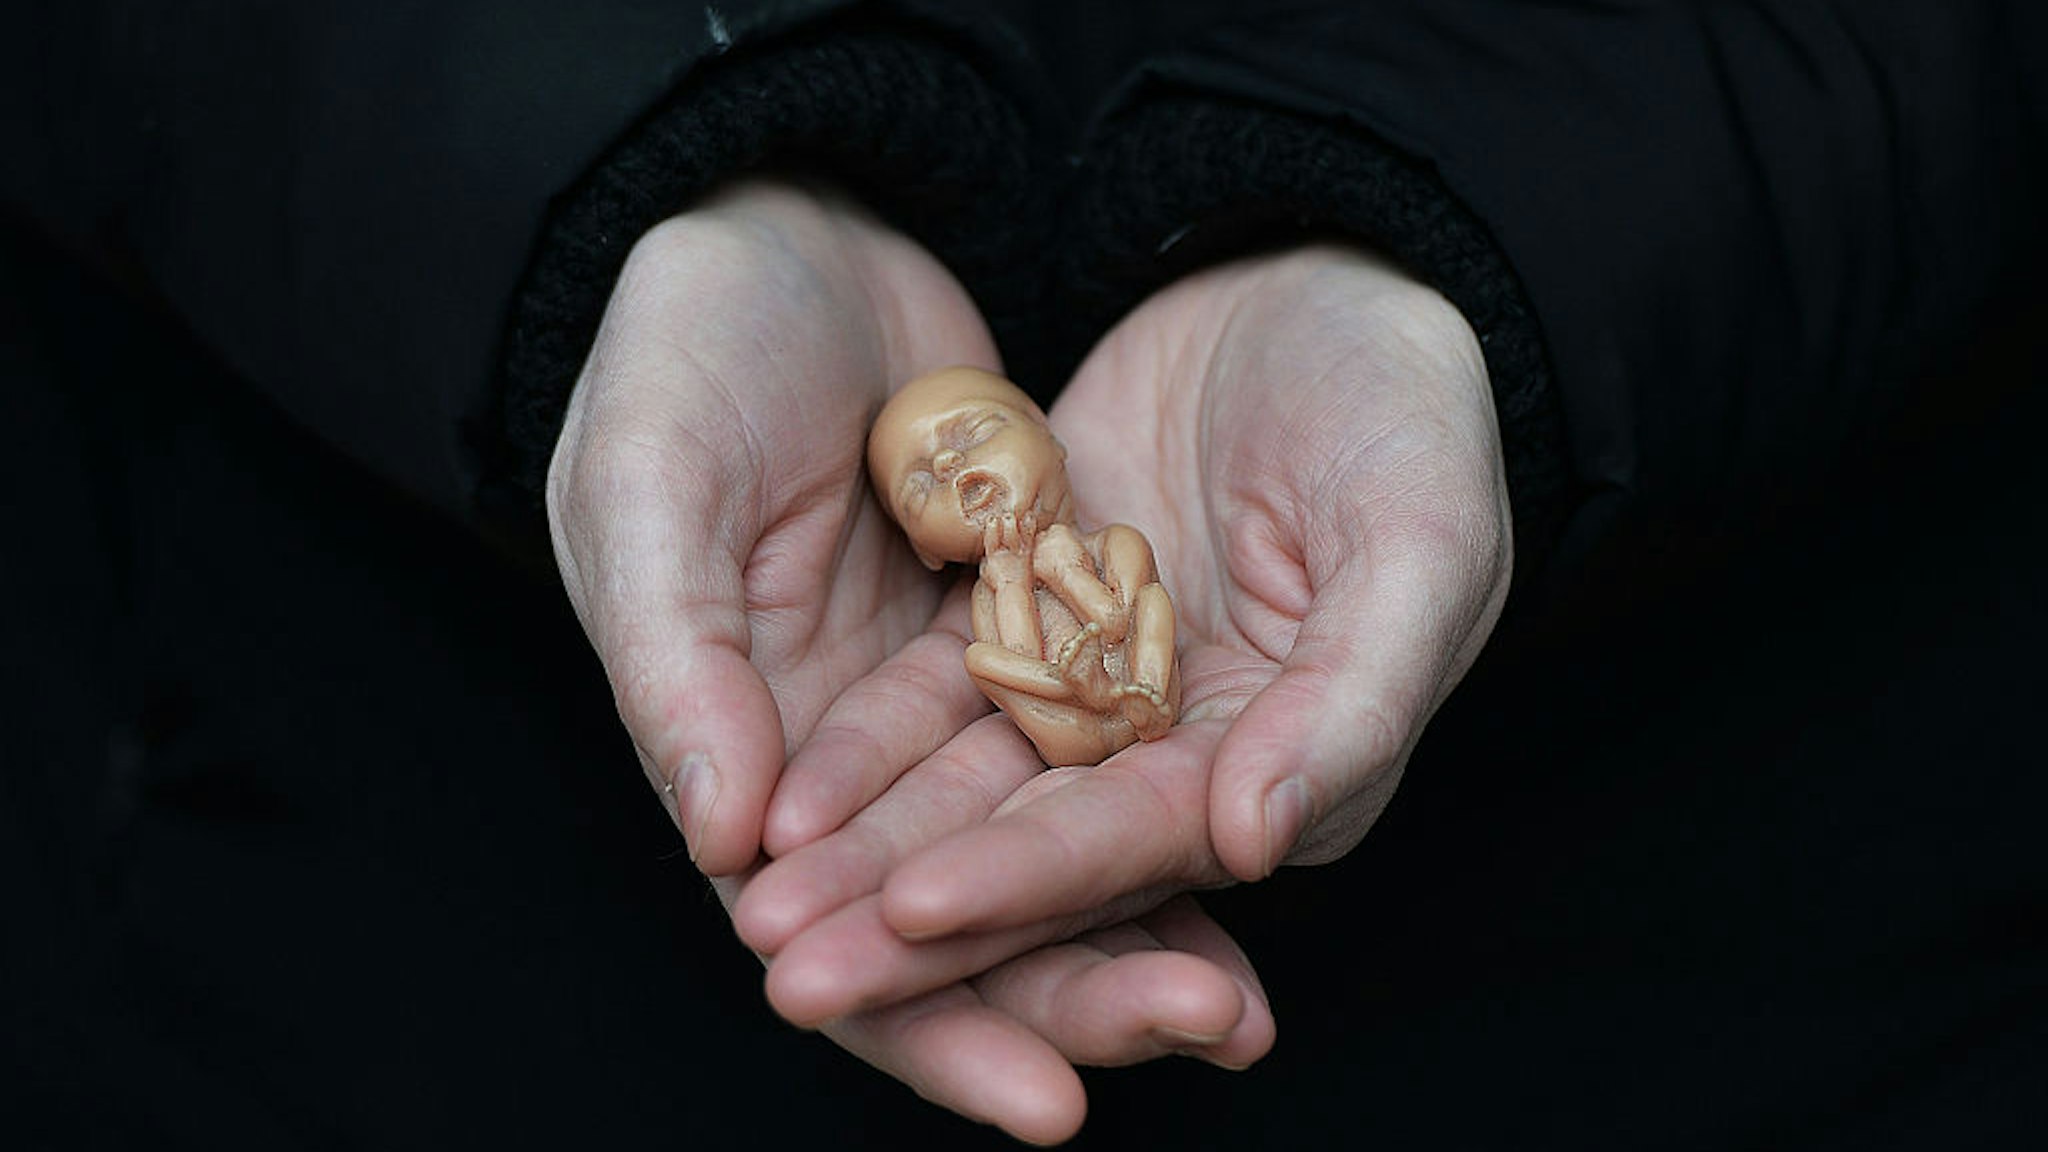 BELFAST, NORTHERN IRELAND - APRIL 07: A Pro Life campaigner displays a plastic doll representing a 12 week old foetus as she stands outside the Marie Stopes Clinic on April 7, 2016 in Belfast, Northern Ireland. The anit abortion supporters have protested outside the clinic where women can go for advice concerning terminating their pregnancy since it opened in 2012. The abortion laws in Northern Ireland are in the news again after a 21 year old Northern Irish woman was convicted and sentenced earlier this week for procuring a miscarriage. The woman who cannot be named for legal reasons had pleaded guilty to two charges of procuring her own abortion by using a poison and of supplying a poison with intent to procure a miscarriage, she was ten-twelve weeks pregnant at the time. She was given a three-month prison sentence by Judge David McFarland at Belfast high court, which was suspended for two years. Unlike the rest of the United Kingdom, the law in Northern Ireland rules that terminating a pregnancy is illegal except in very limited circumstances.